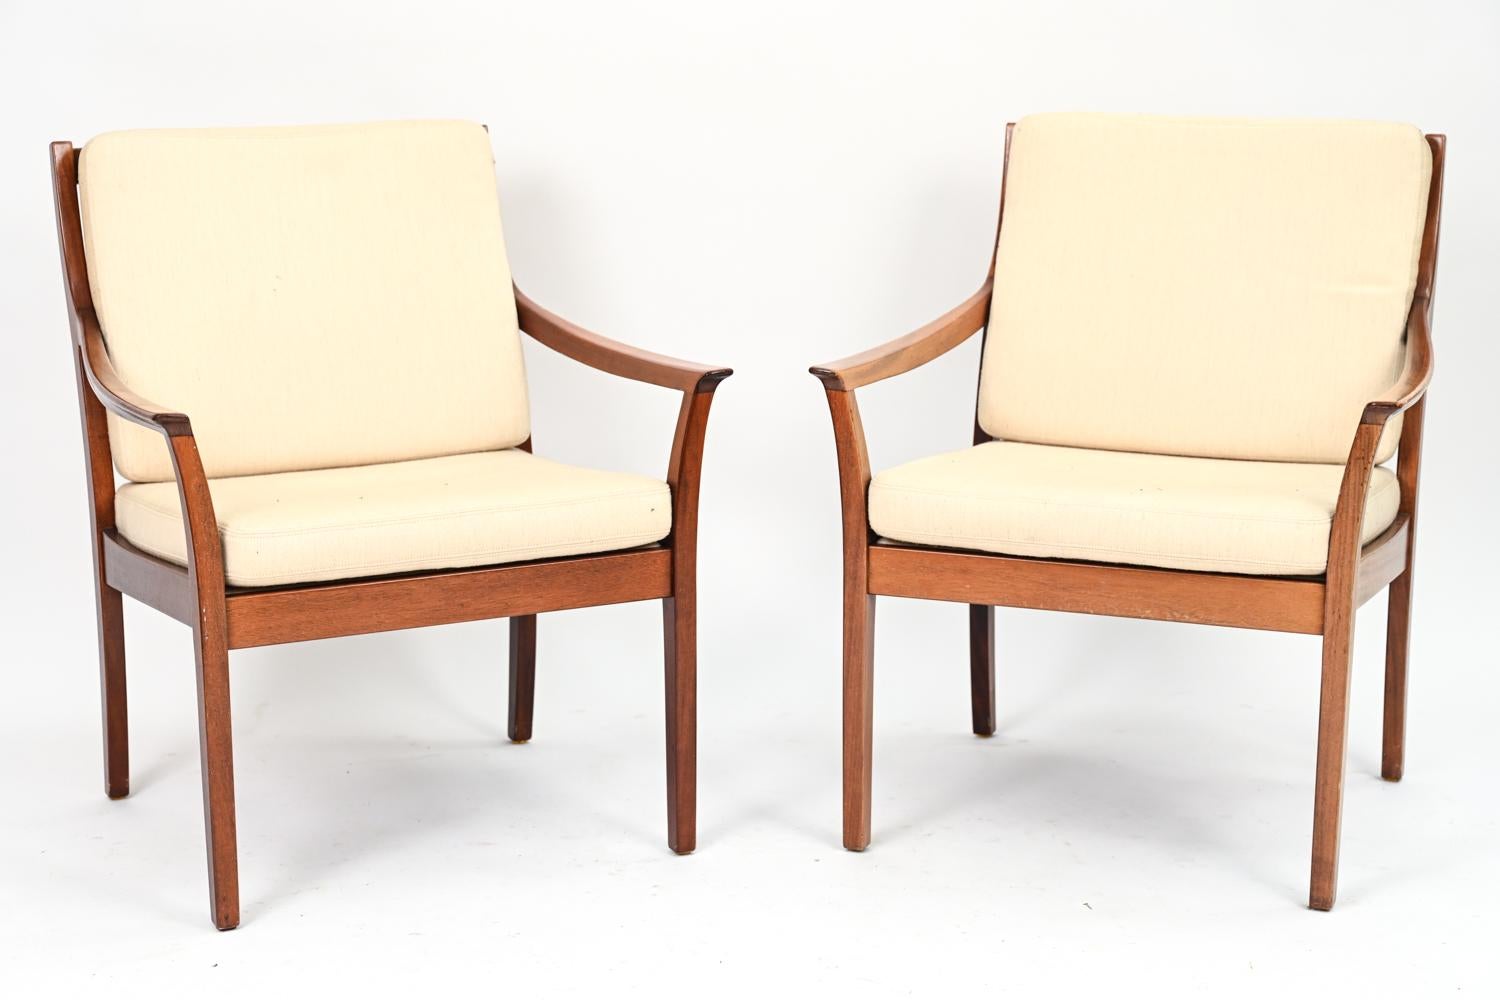 A rare, elegant pair of Danish mid-century lounge chairs with unusual slatted backs, gracefully curving armrests, and cream wool cushions by Torbjorn Afdal, whose highly sought designs were bought by US first lady Jacqueline Kennedy and by the